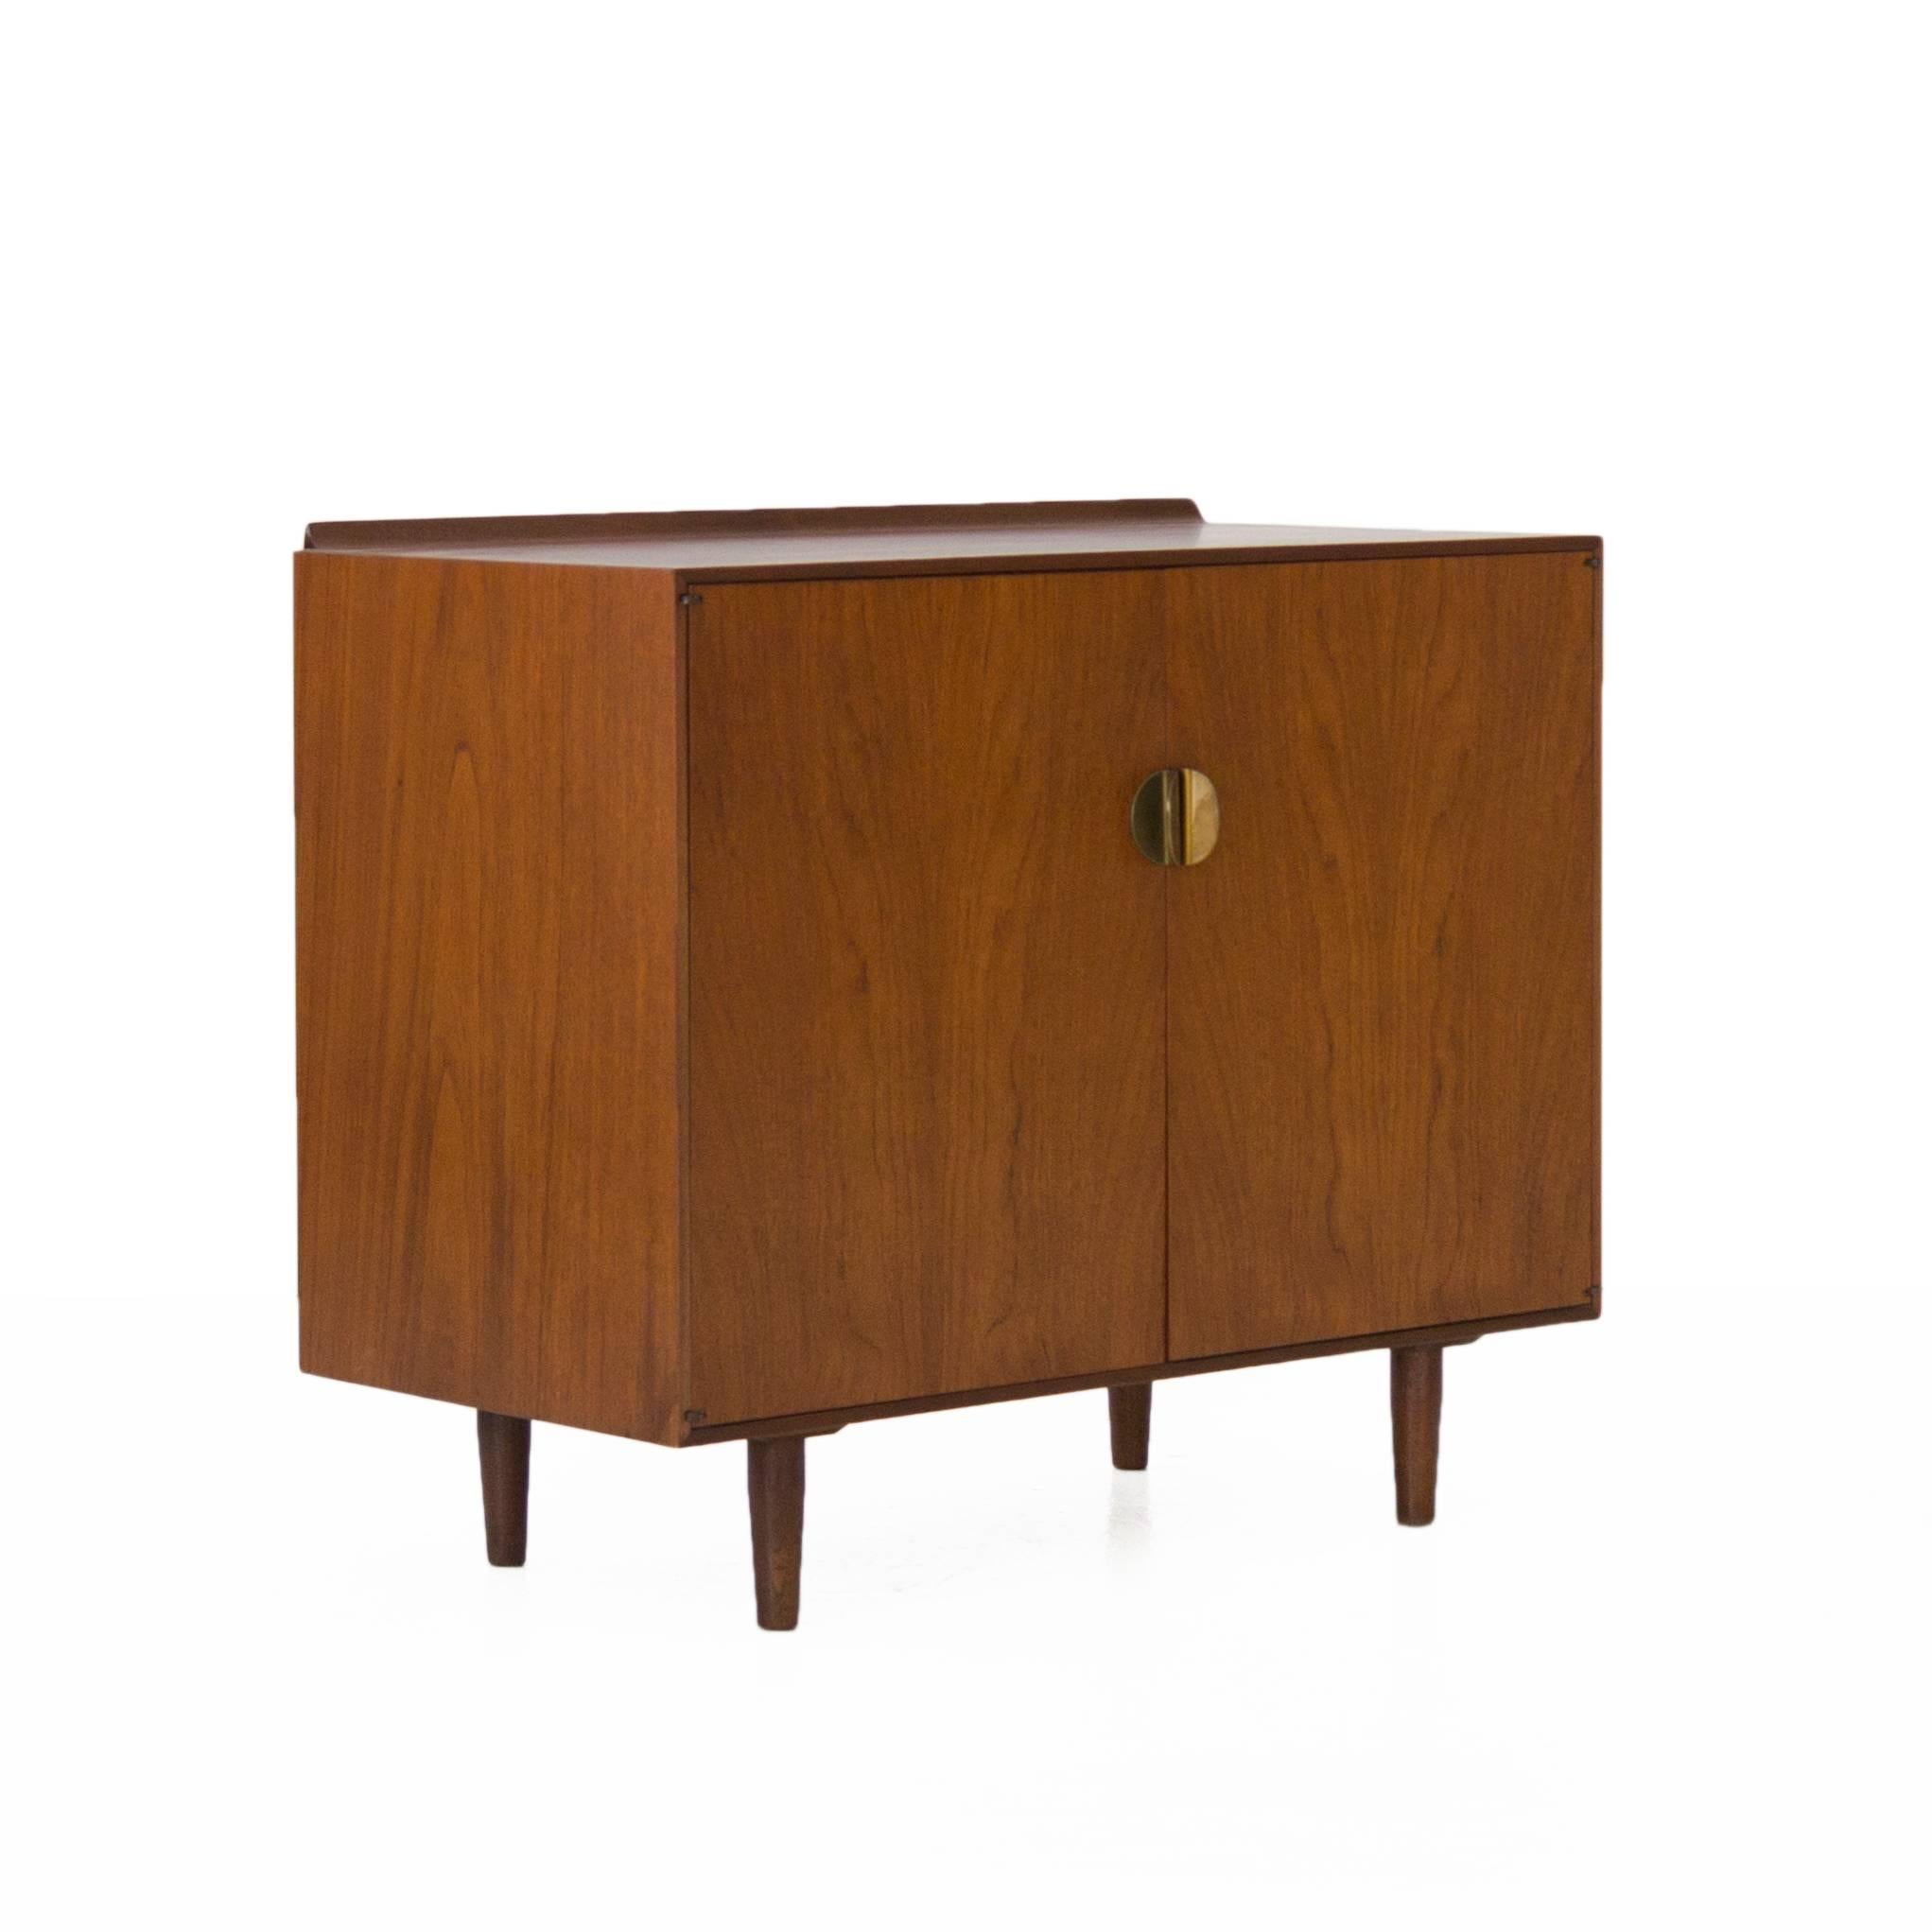 Finn Juhl for Baker cabinet with two doors and drawers part. Produced by in 1952. Signed with Baker tag inside.